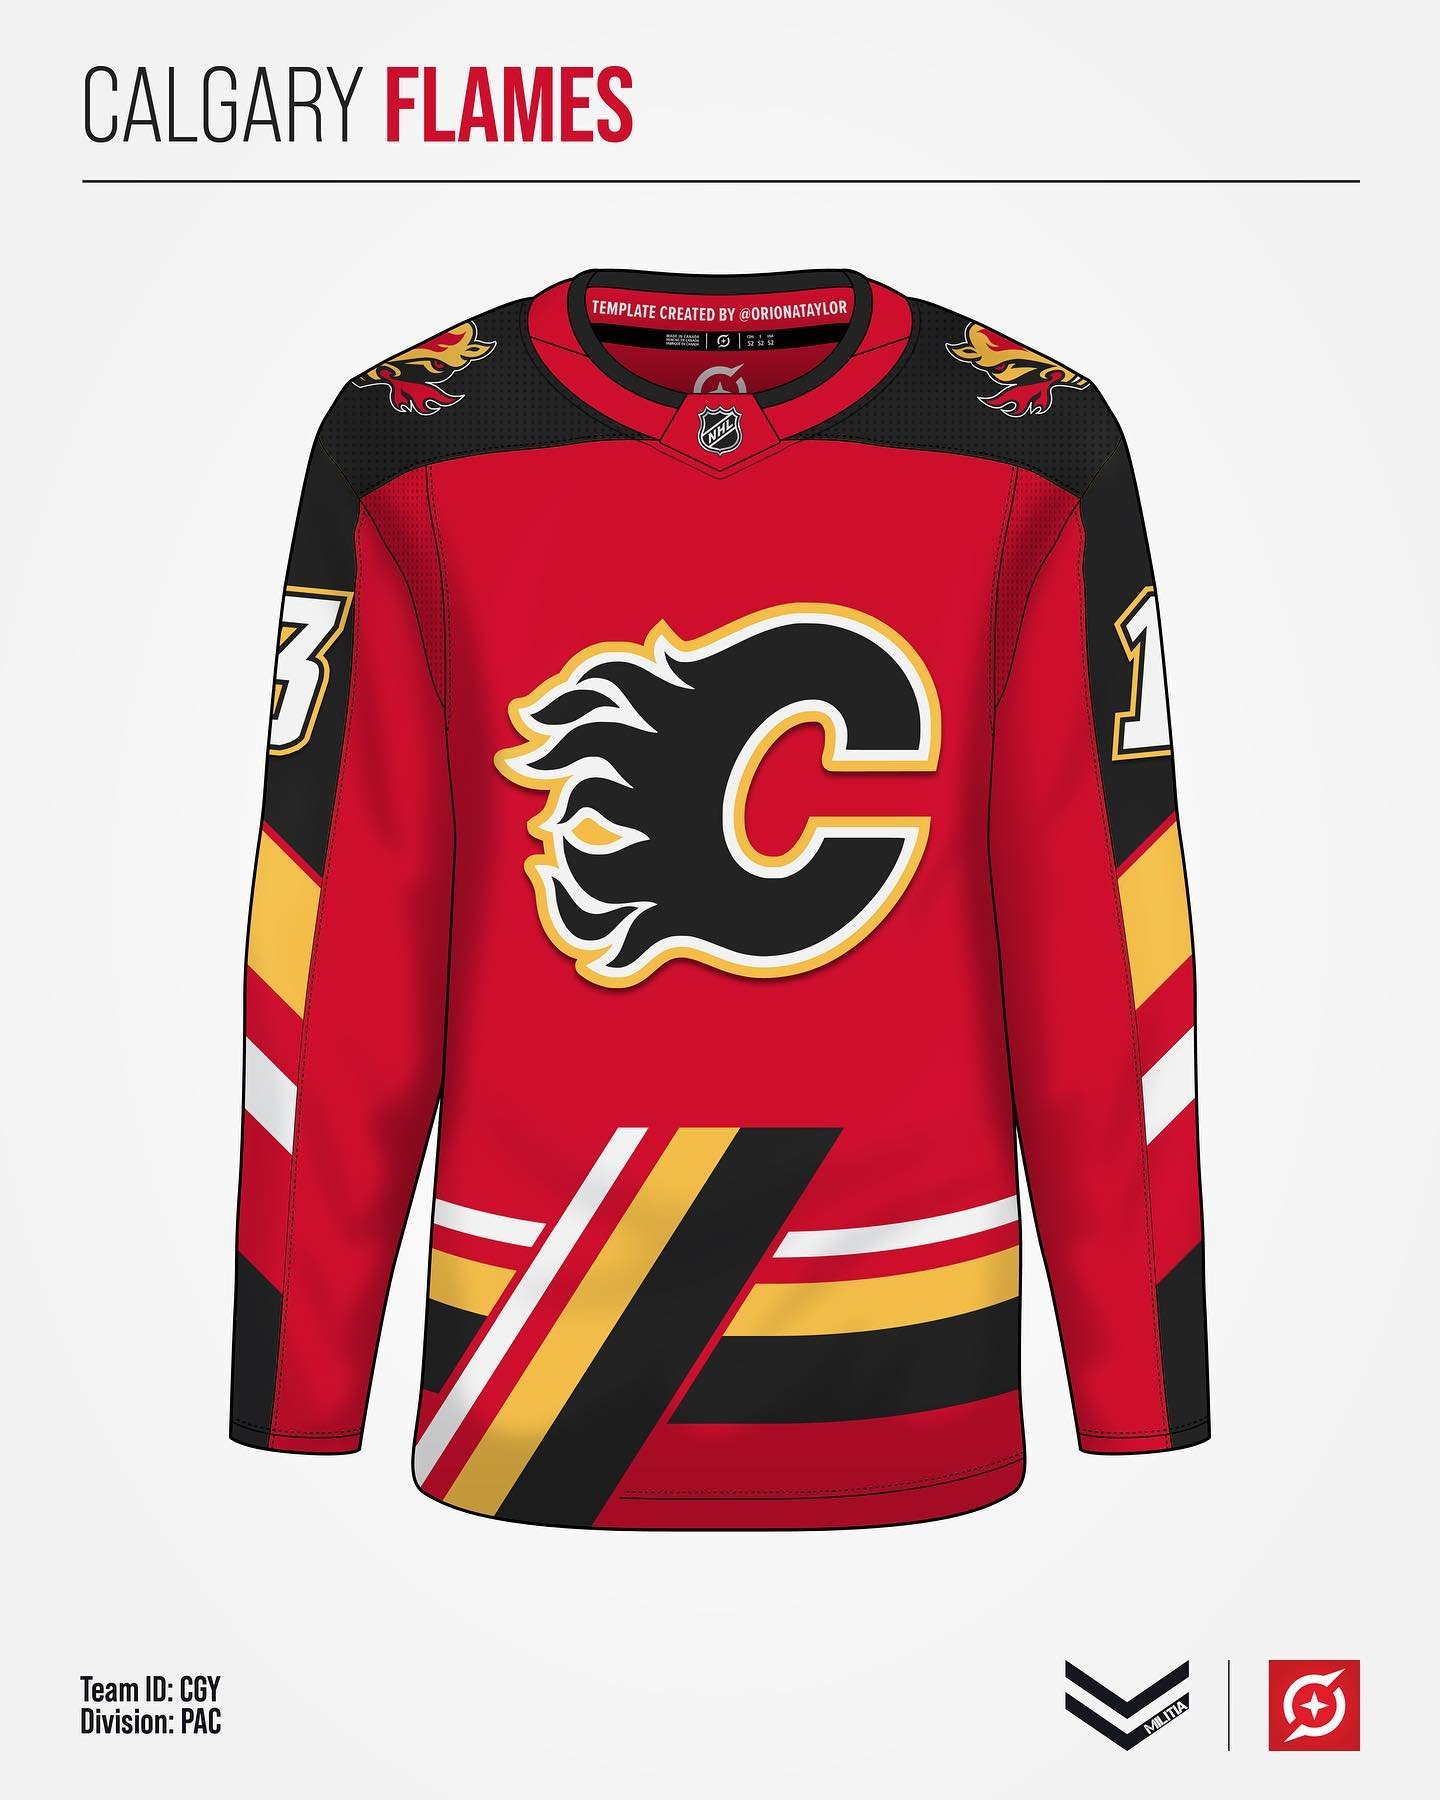 For today&rsquo;s Retromix releases, the @nhlflames are up! 

Before anyone gets upset over the home and road jerseys, let me explain. These were completed when the initial goal of the series was to take a controversial element and remix it. I&rsquo;